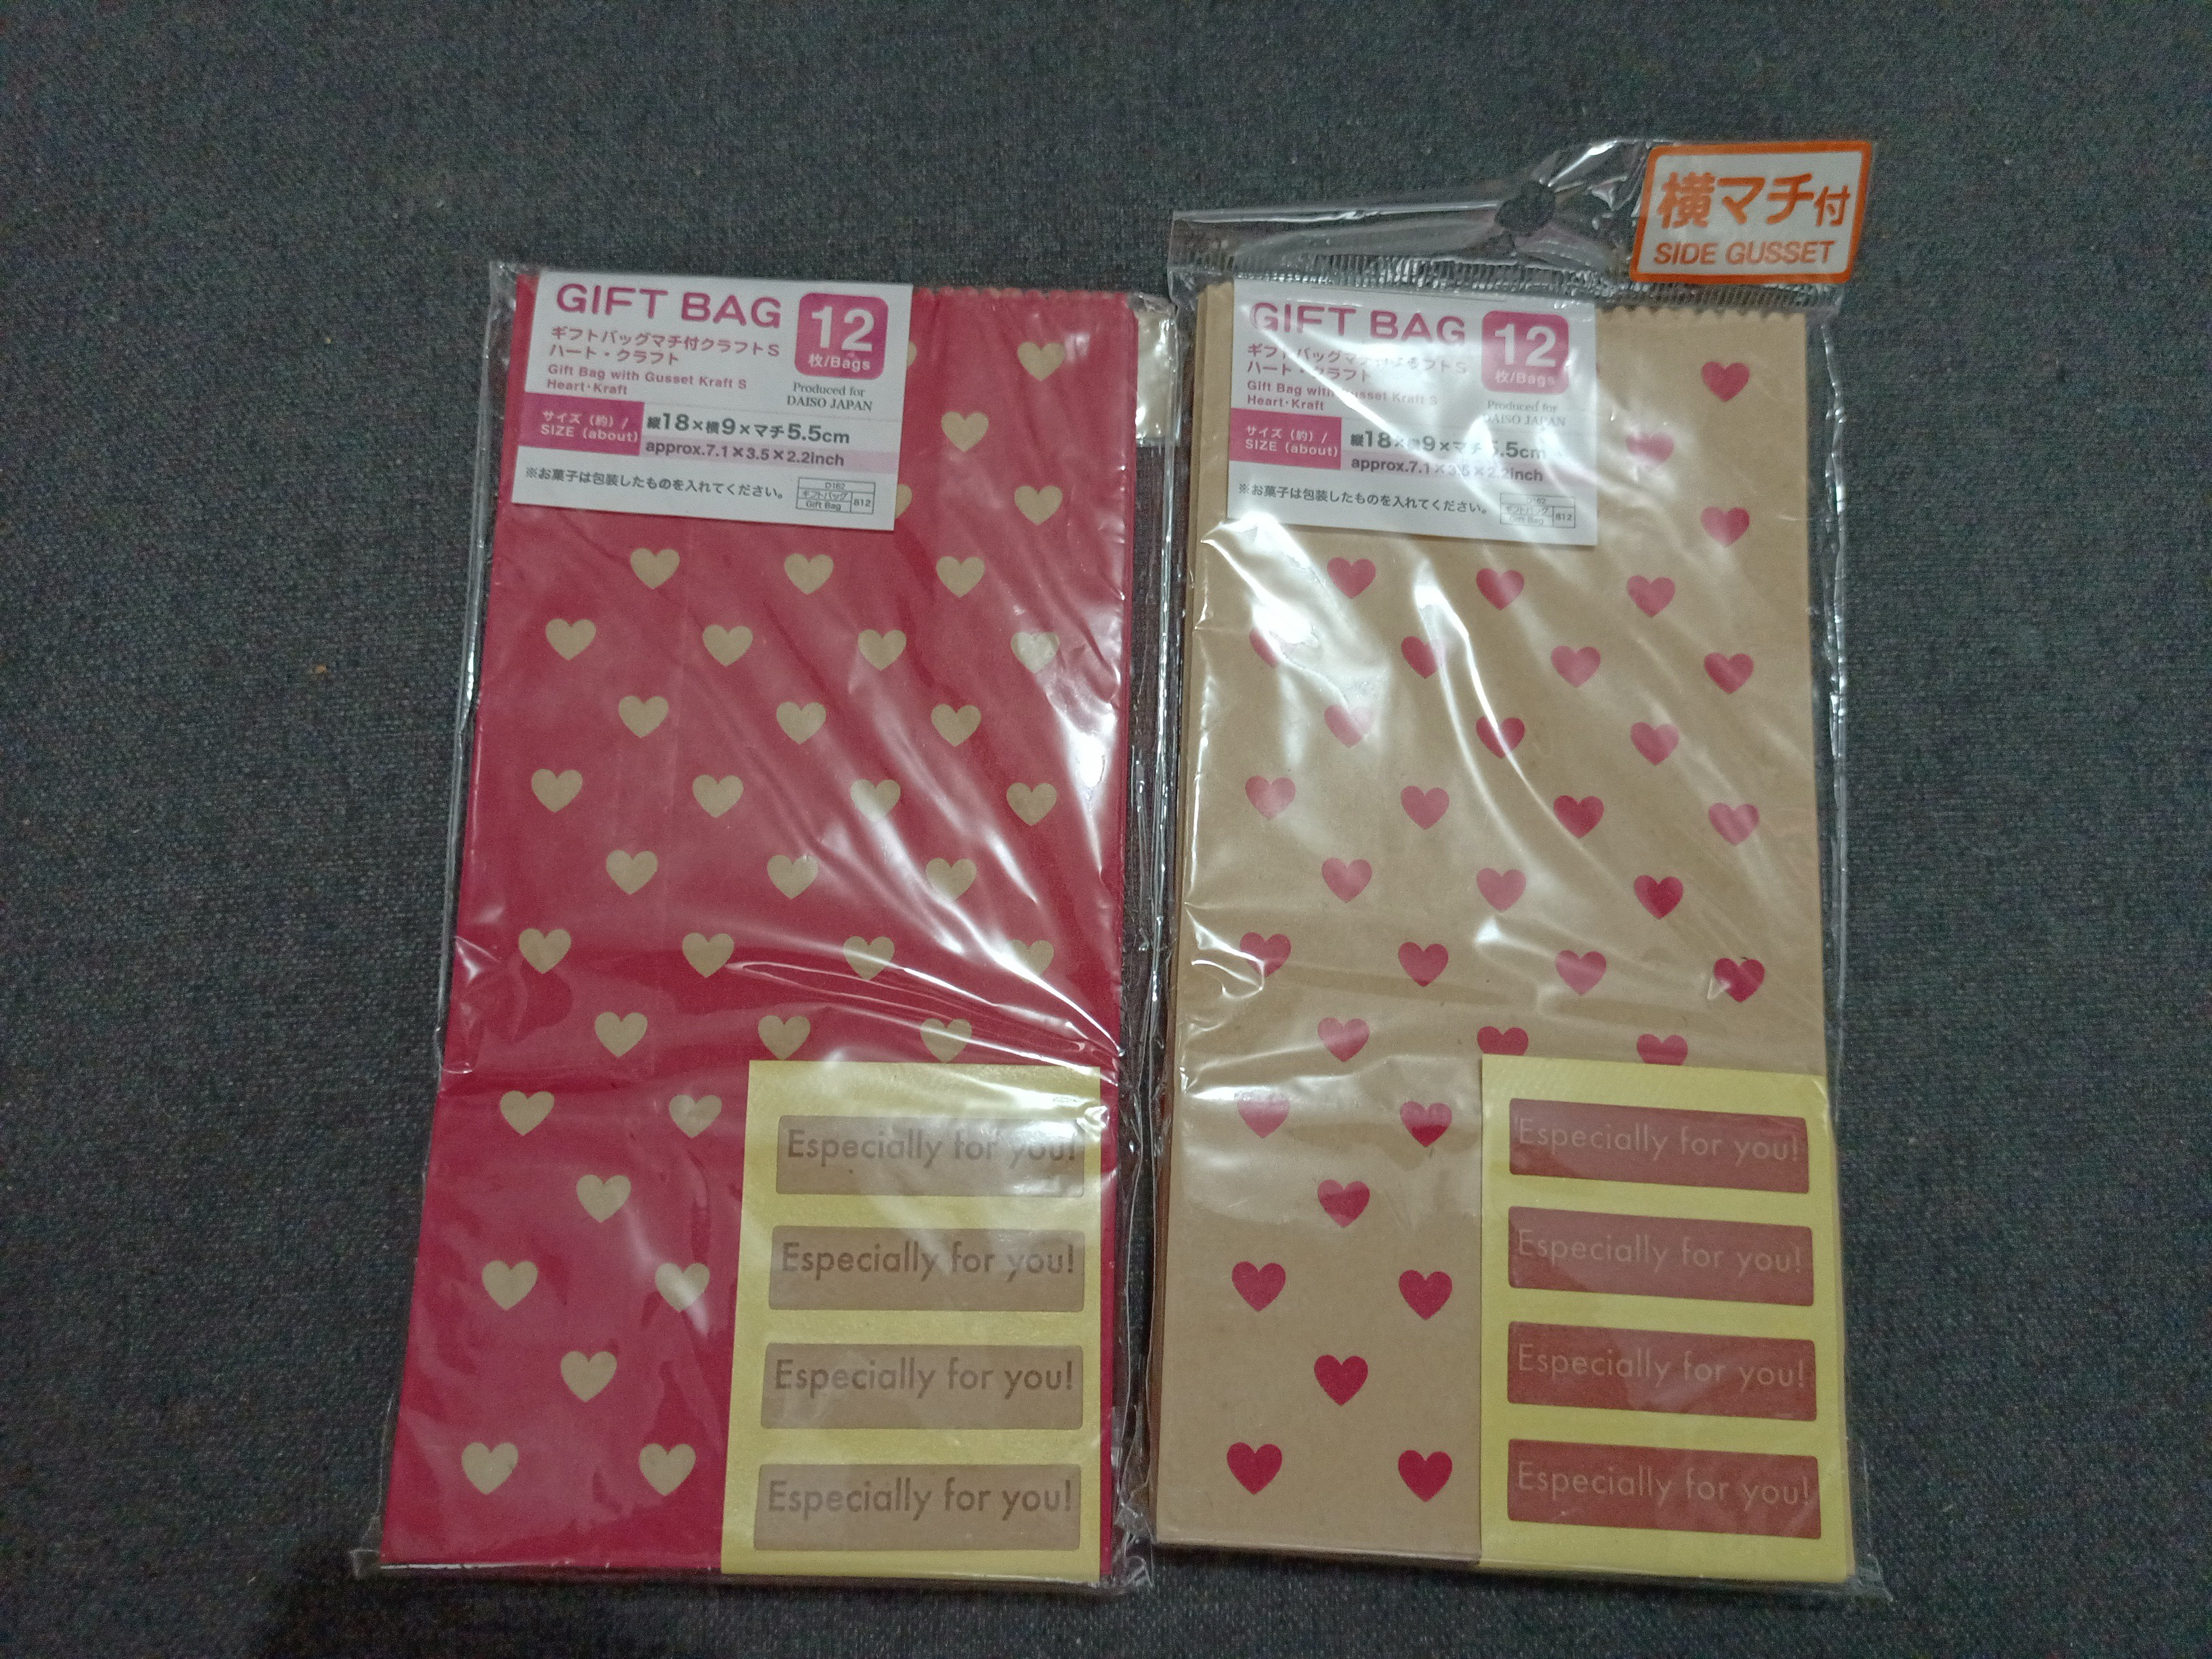 Travel Vacuum Seal Storage Bags – Size L – Daiso Japan Middle East